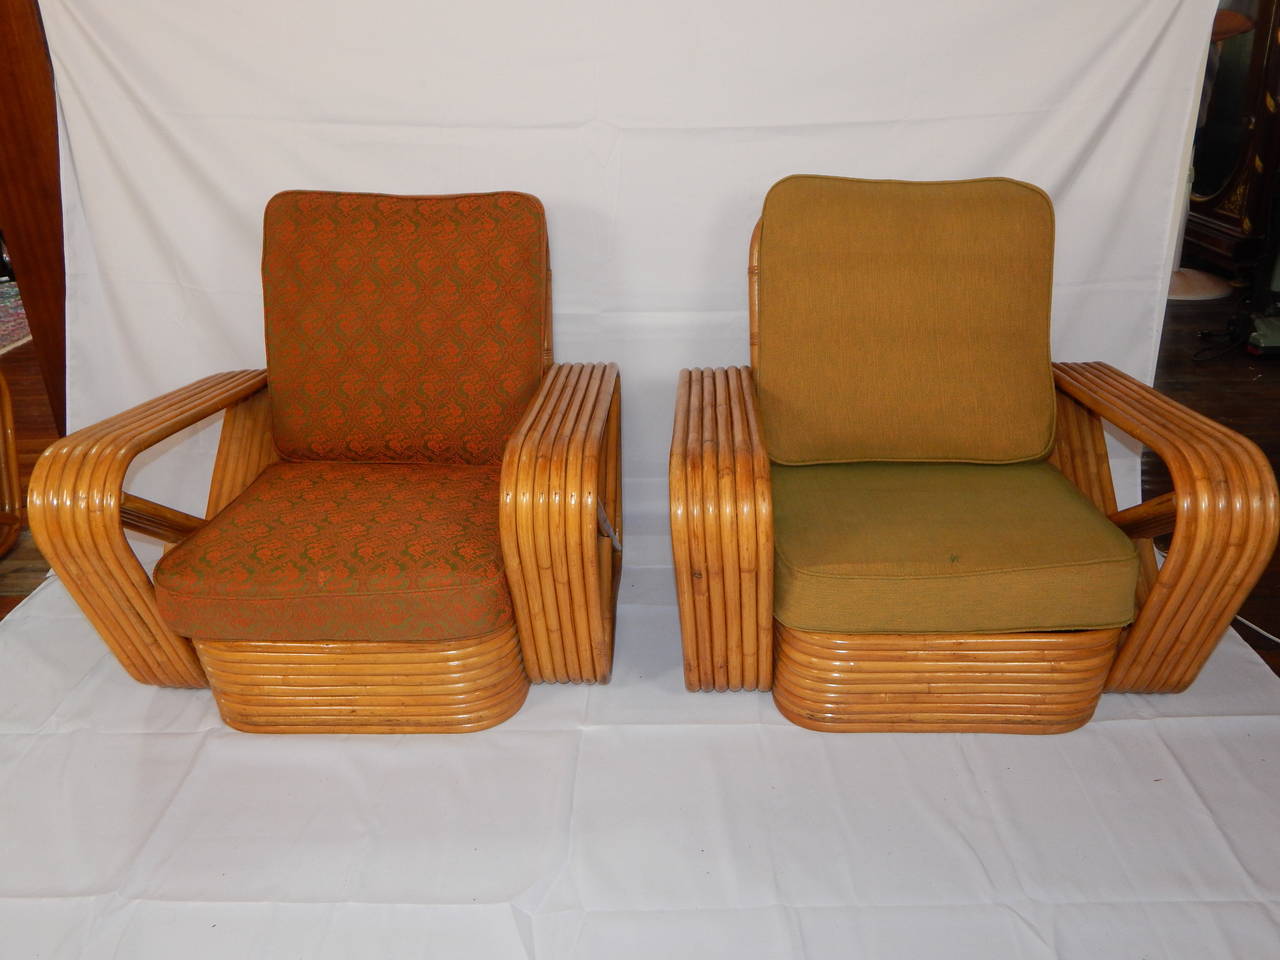 A three-piece rattan set, consisting of two large armchairs and a settee.
This style is referred to as the 